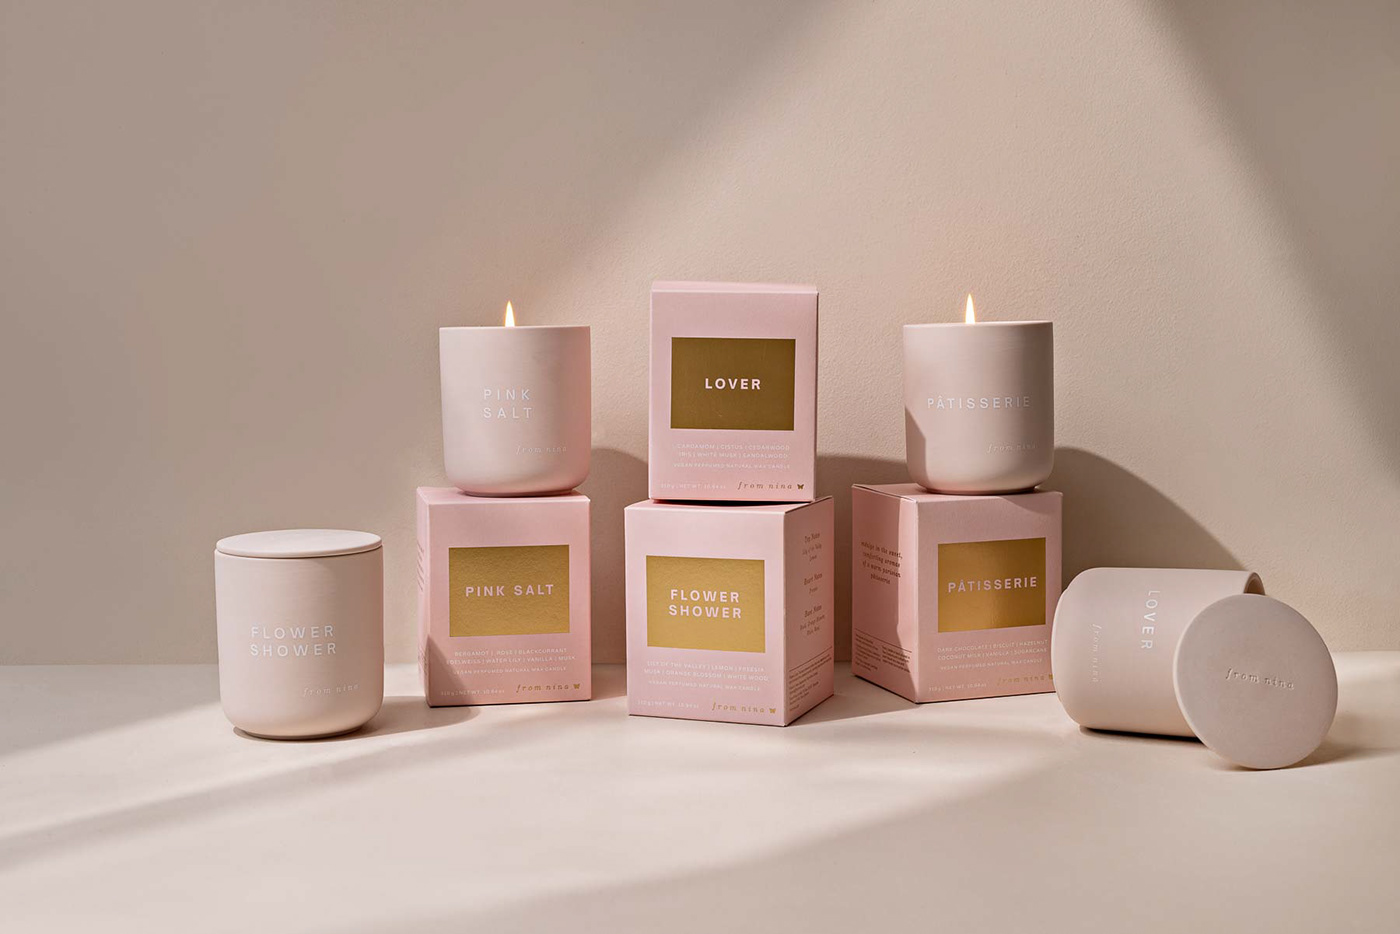 4 candle boxes and their ceramic candles sit in a neutral pink setting